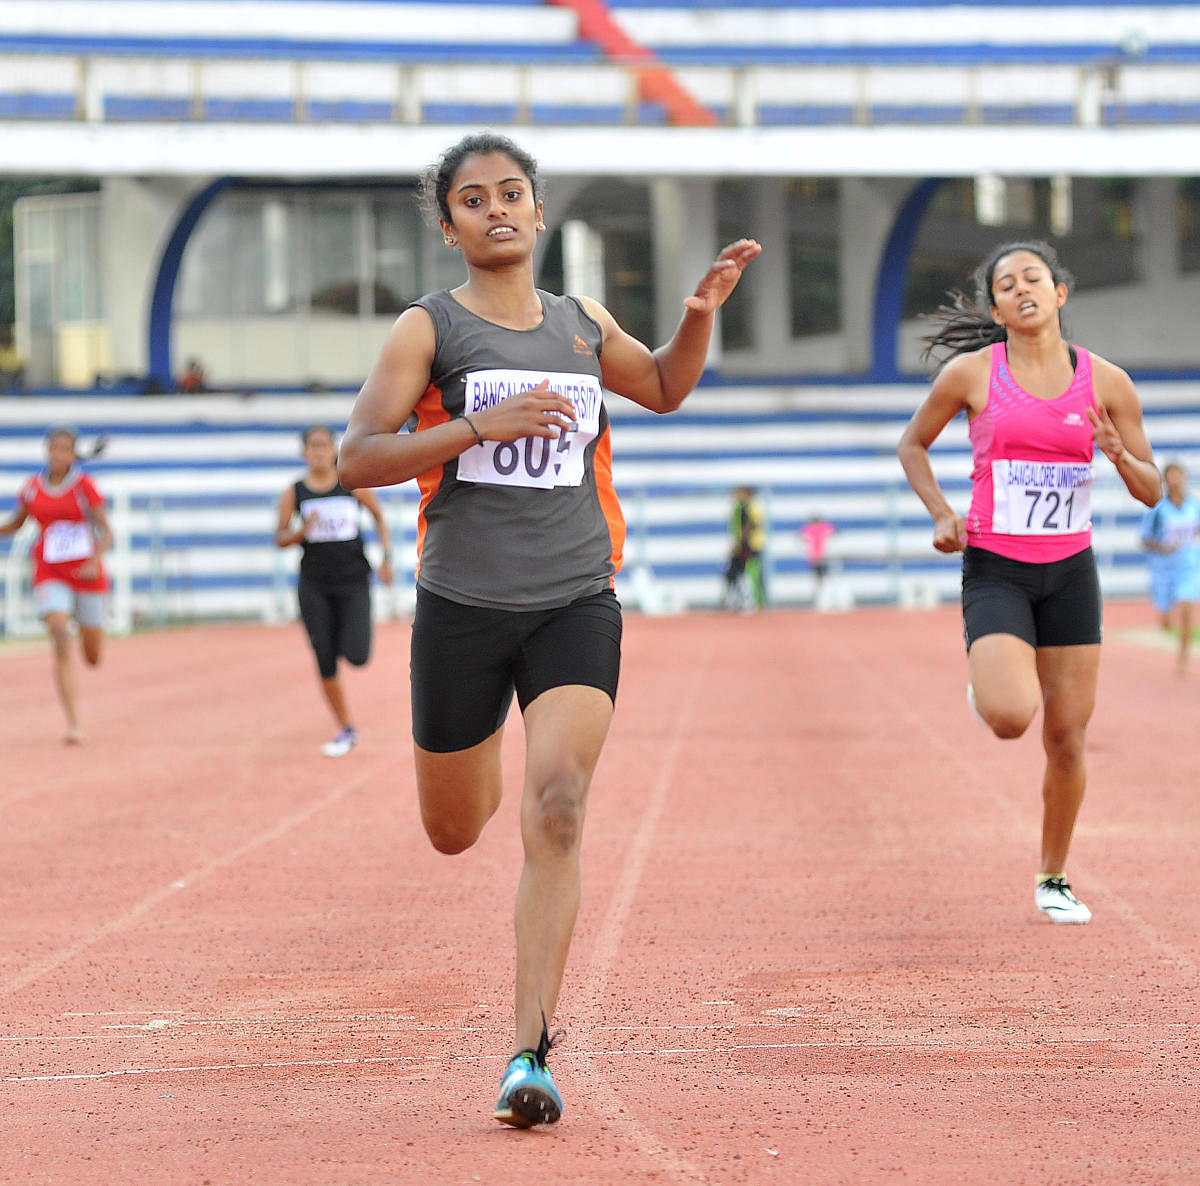 FOCUSED Hailing from a humble background, G K Vijayakumari has worked hard to emerge as one of the top athletes in the country. DH PHOTO/ SRIKANTA SHARMA R